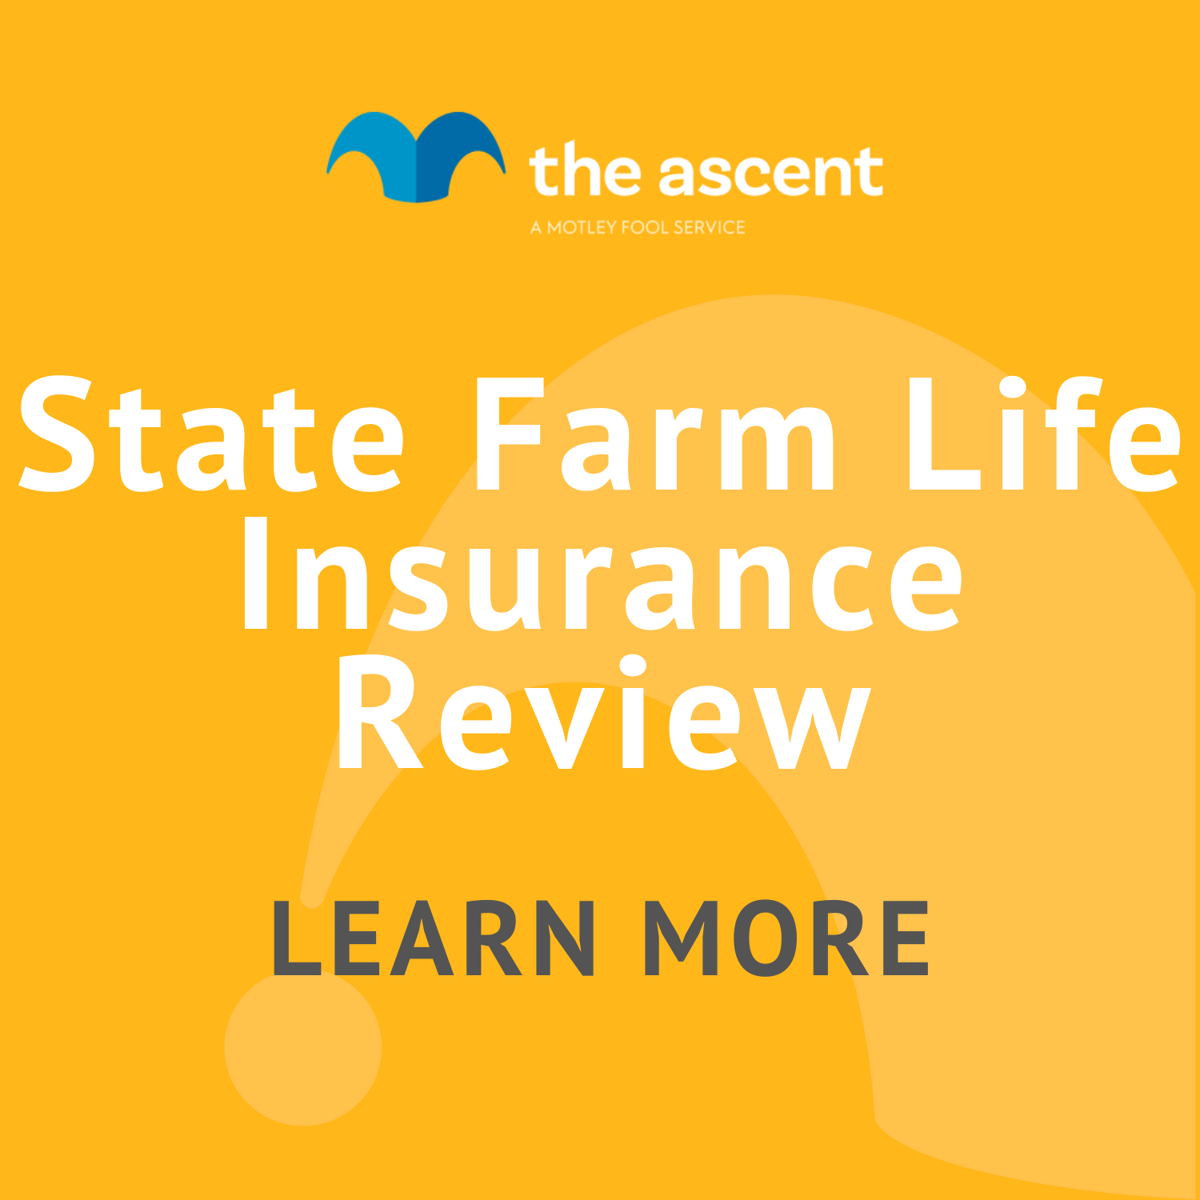 farmers life insurance images